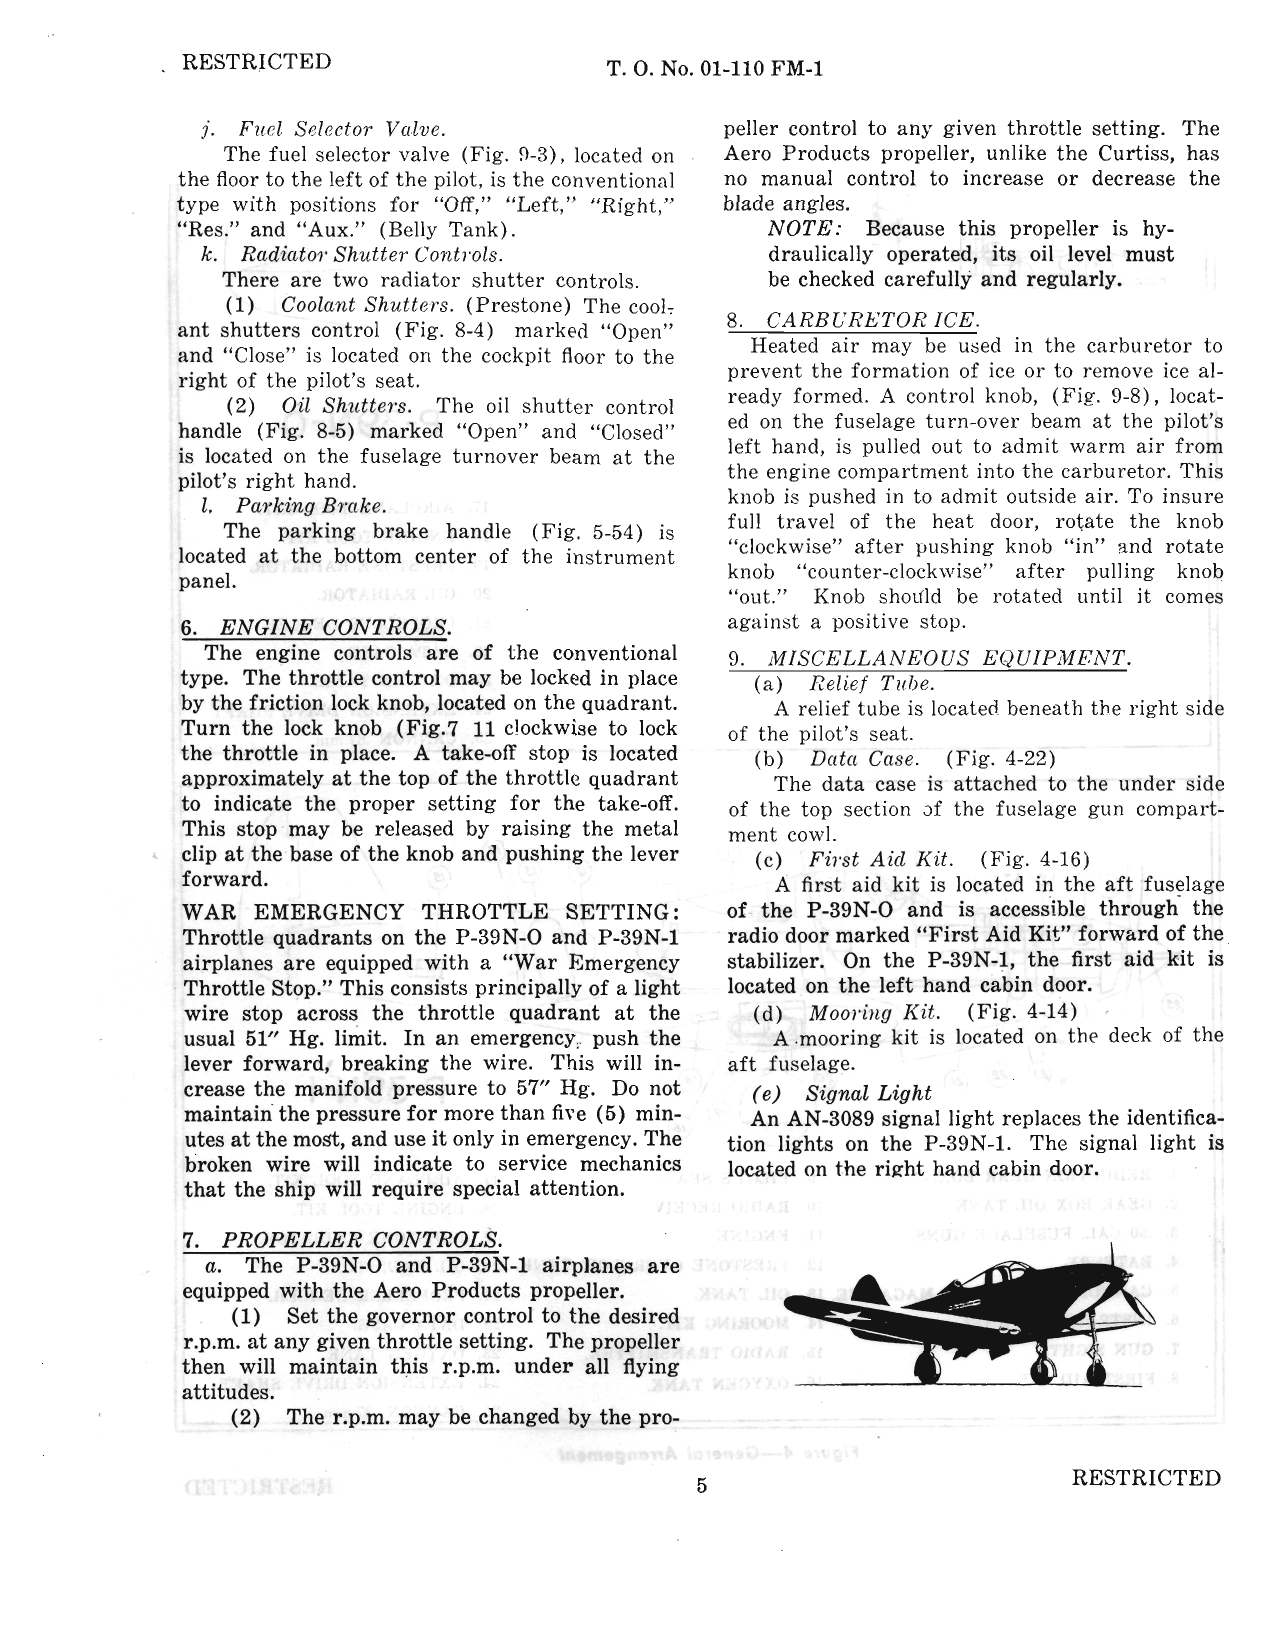 Sample page 7 from AirCorps Library document: Pilot's Flight Operating Instructions for P-39N-O and P-39N-1